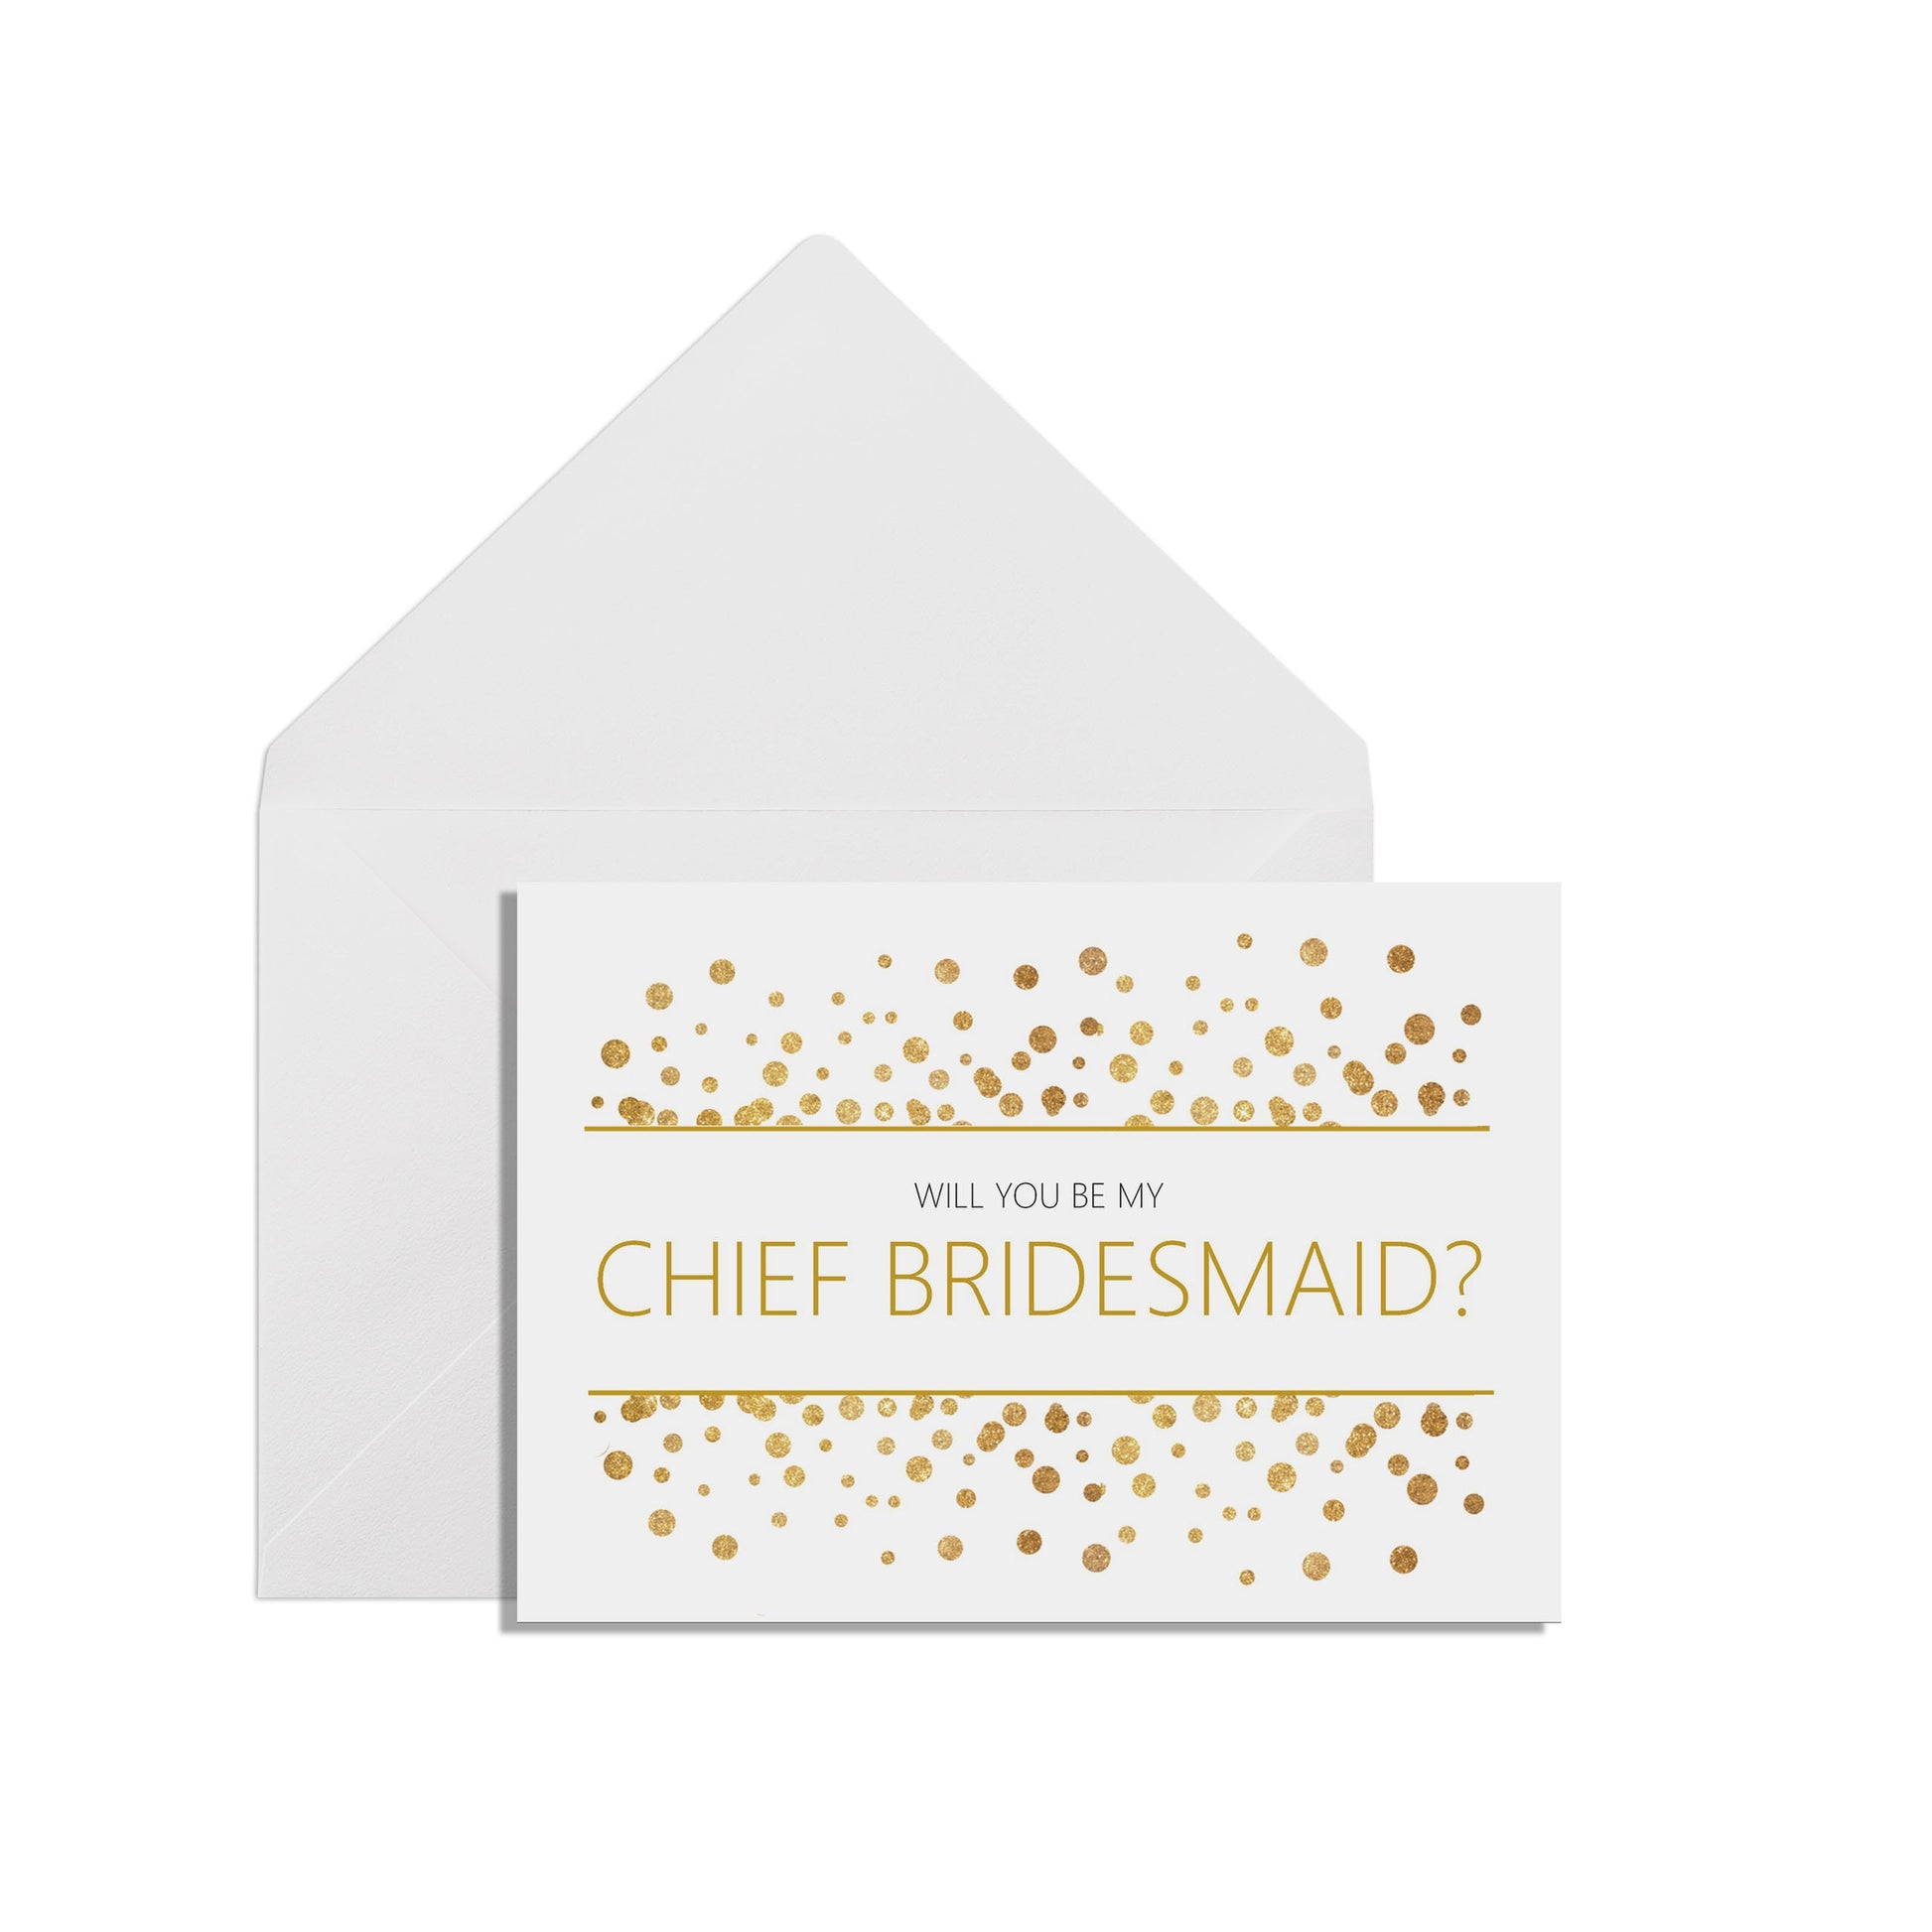 Will You Be My Chief Bridesmaid? A6 Gold Effect Wedding Proposal Card With A White Envelope